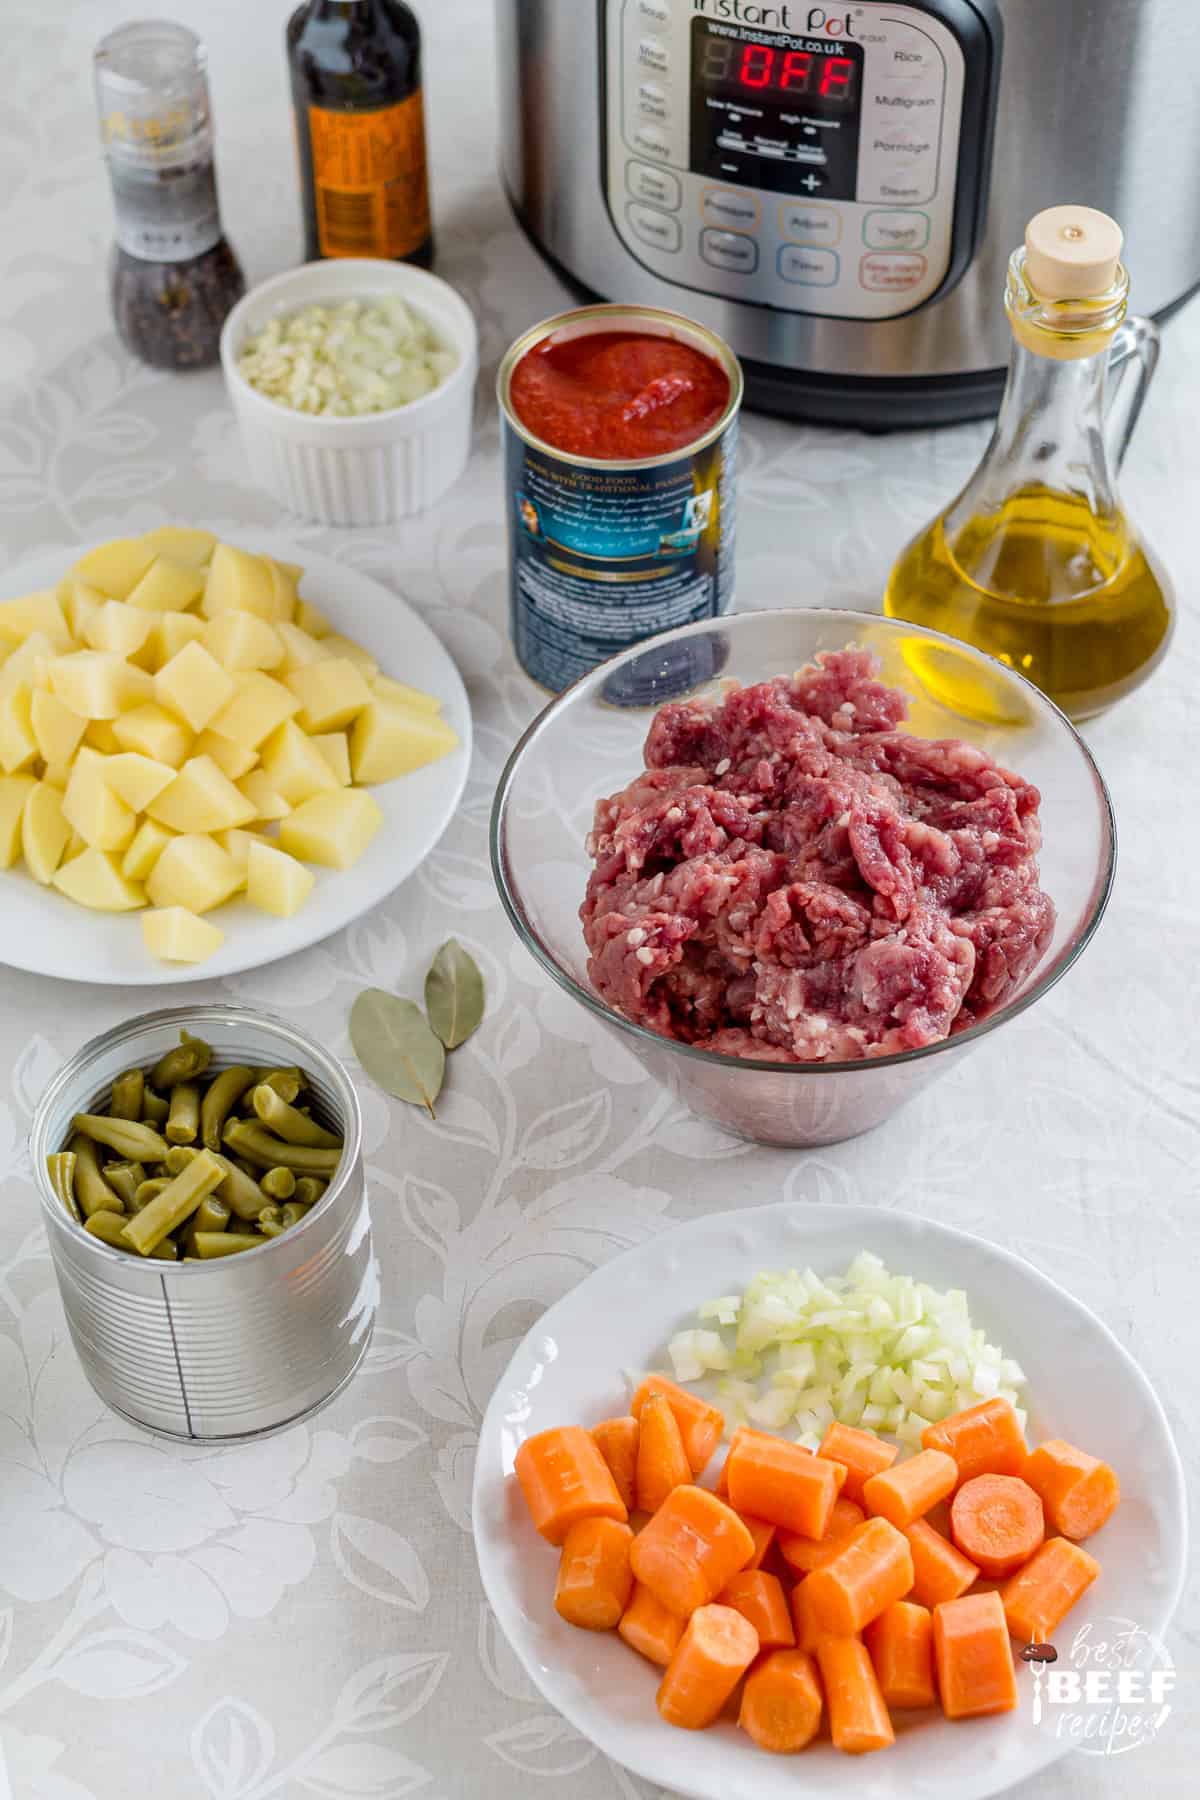 Ingredients for hamburger soup on table